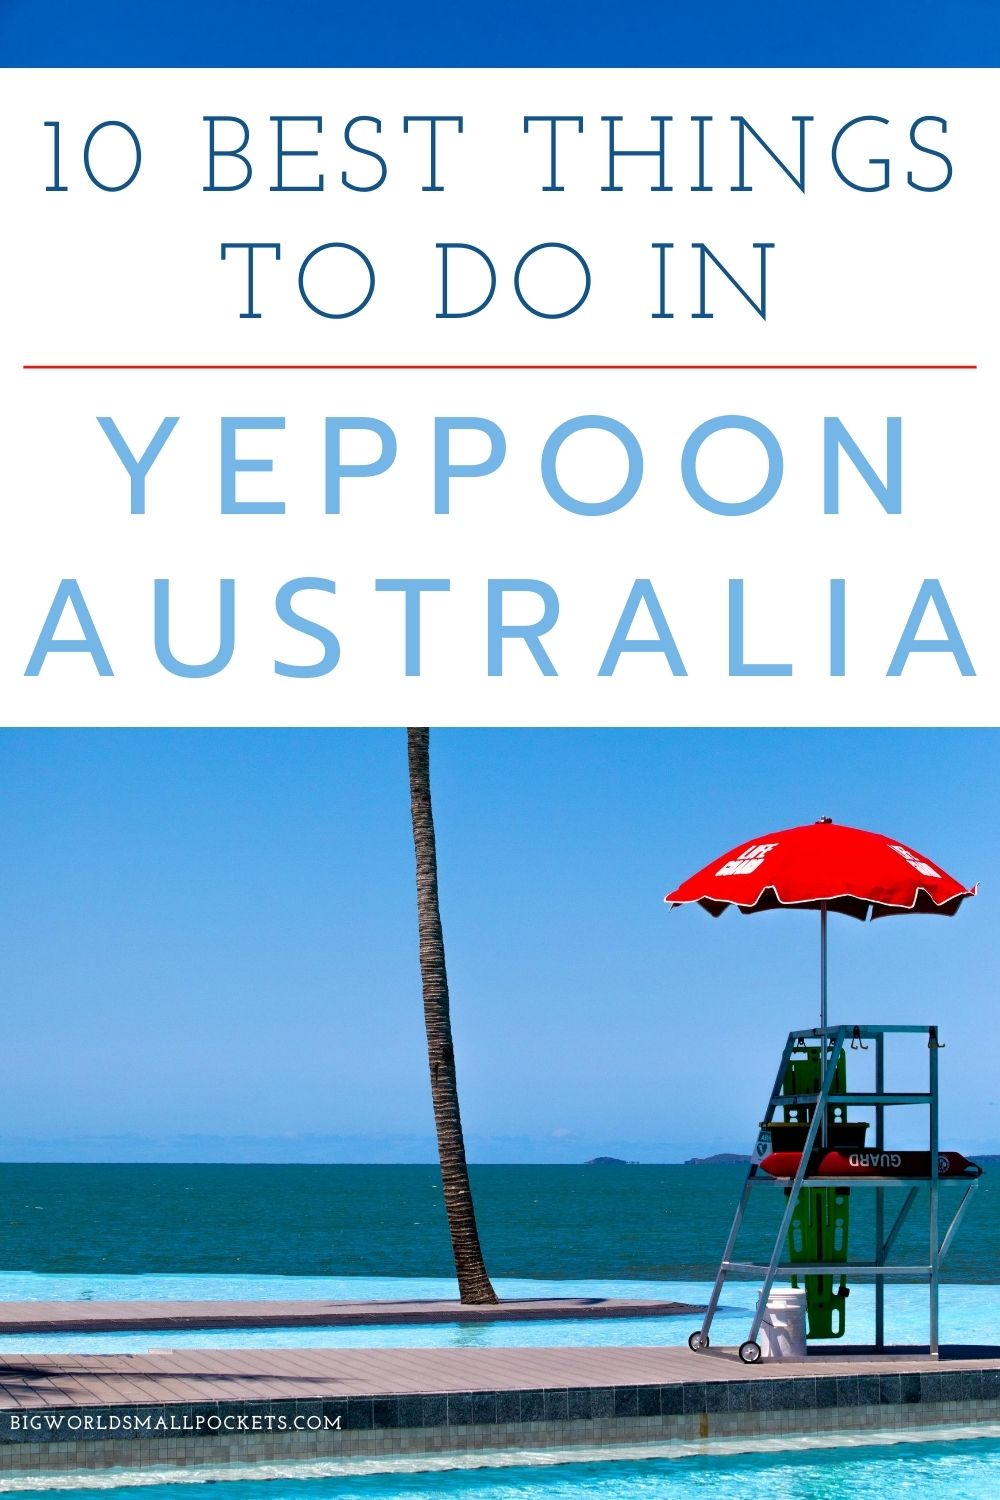 10 Best Things to Do in Yeppoon